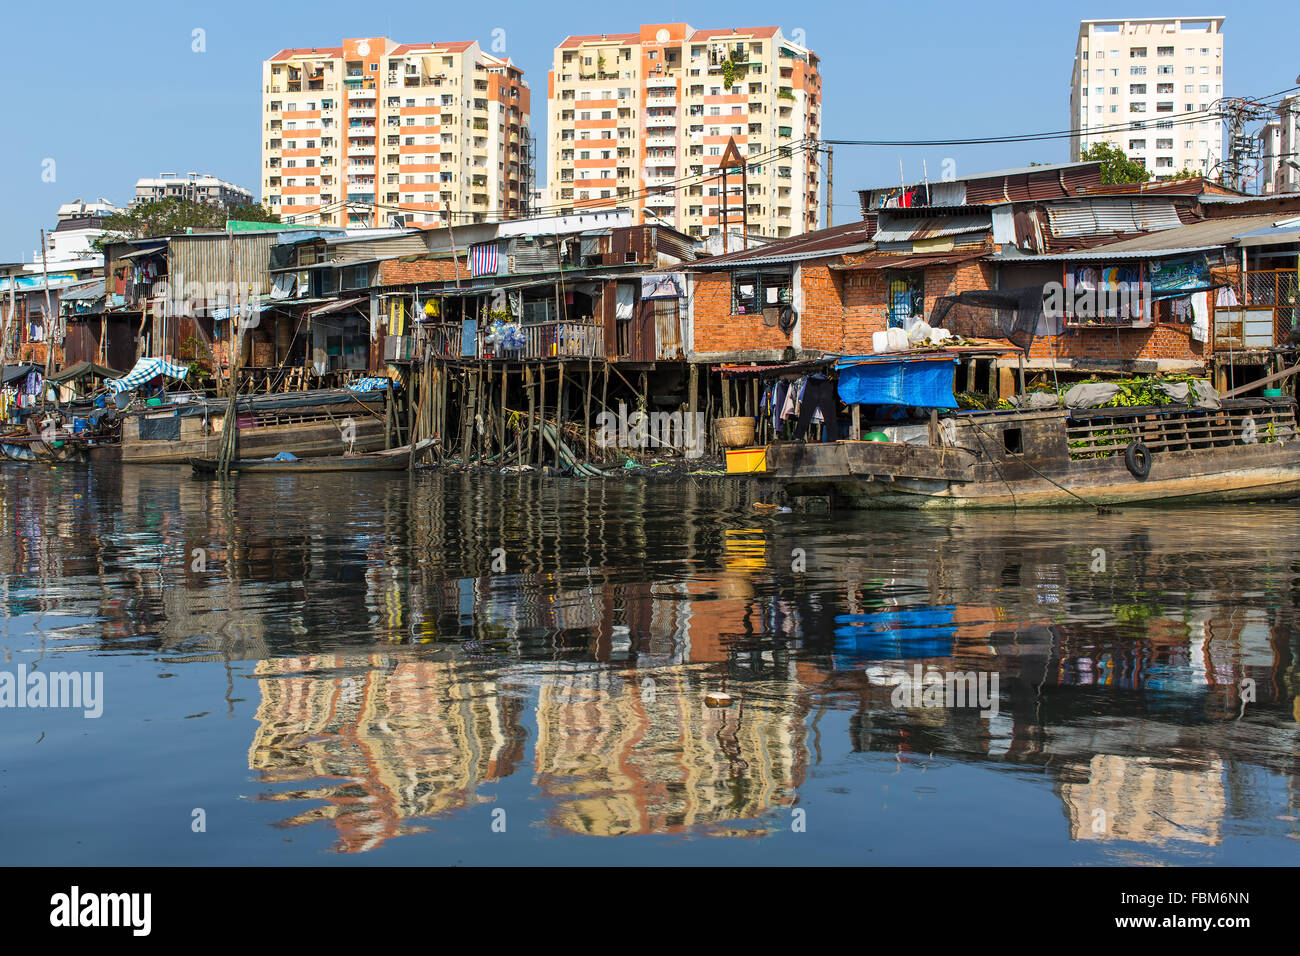 Views of the city's Slums from the river. Ho Chi Minh City, Vietnam. Stock Photo